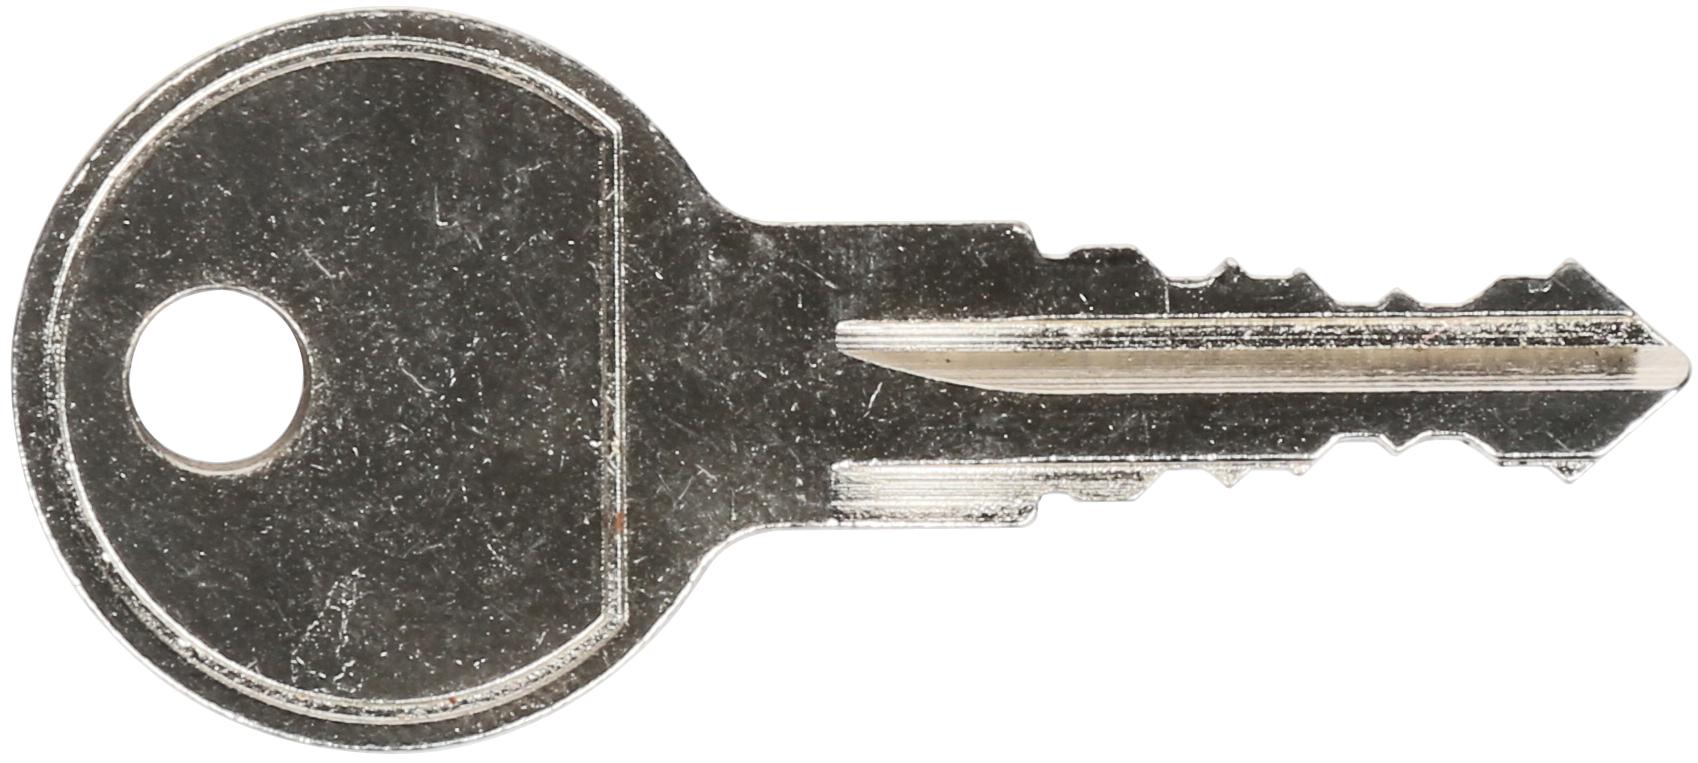 Spare Roof Box Key 151